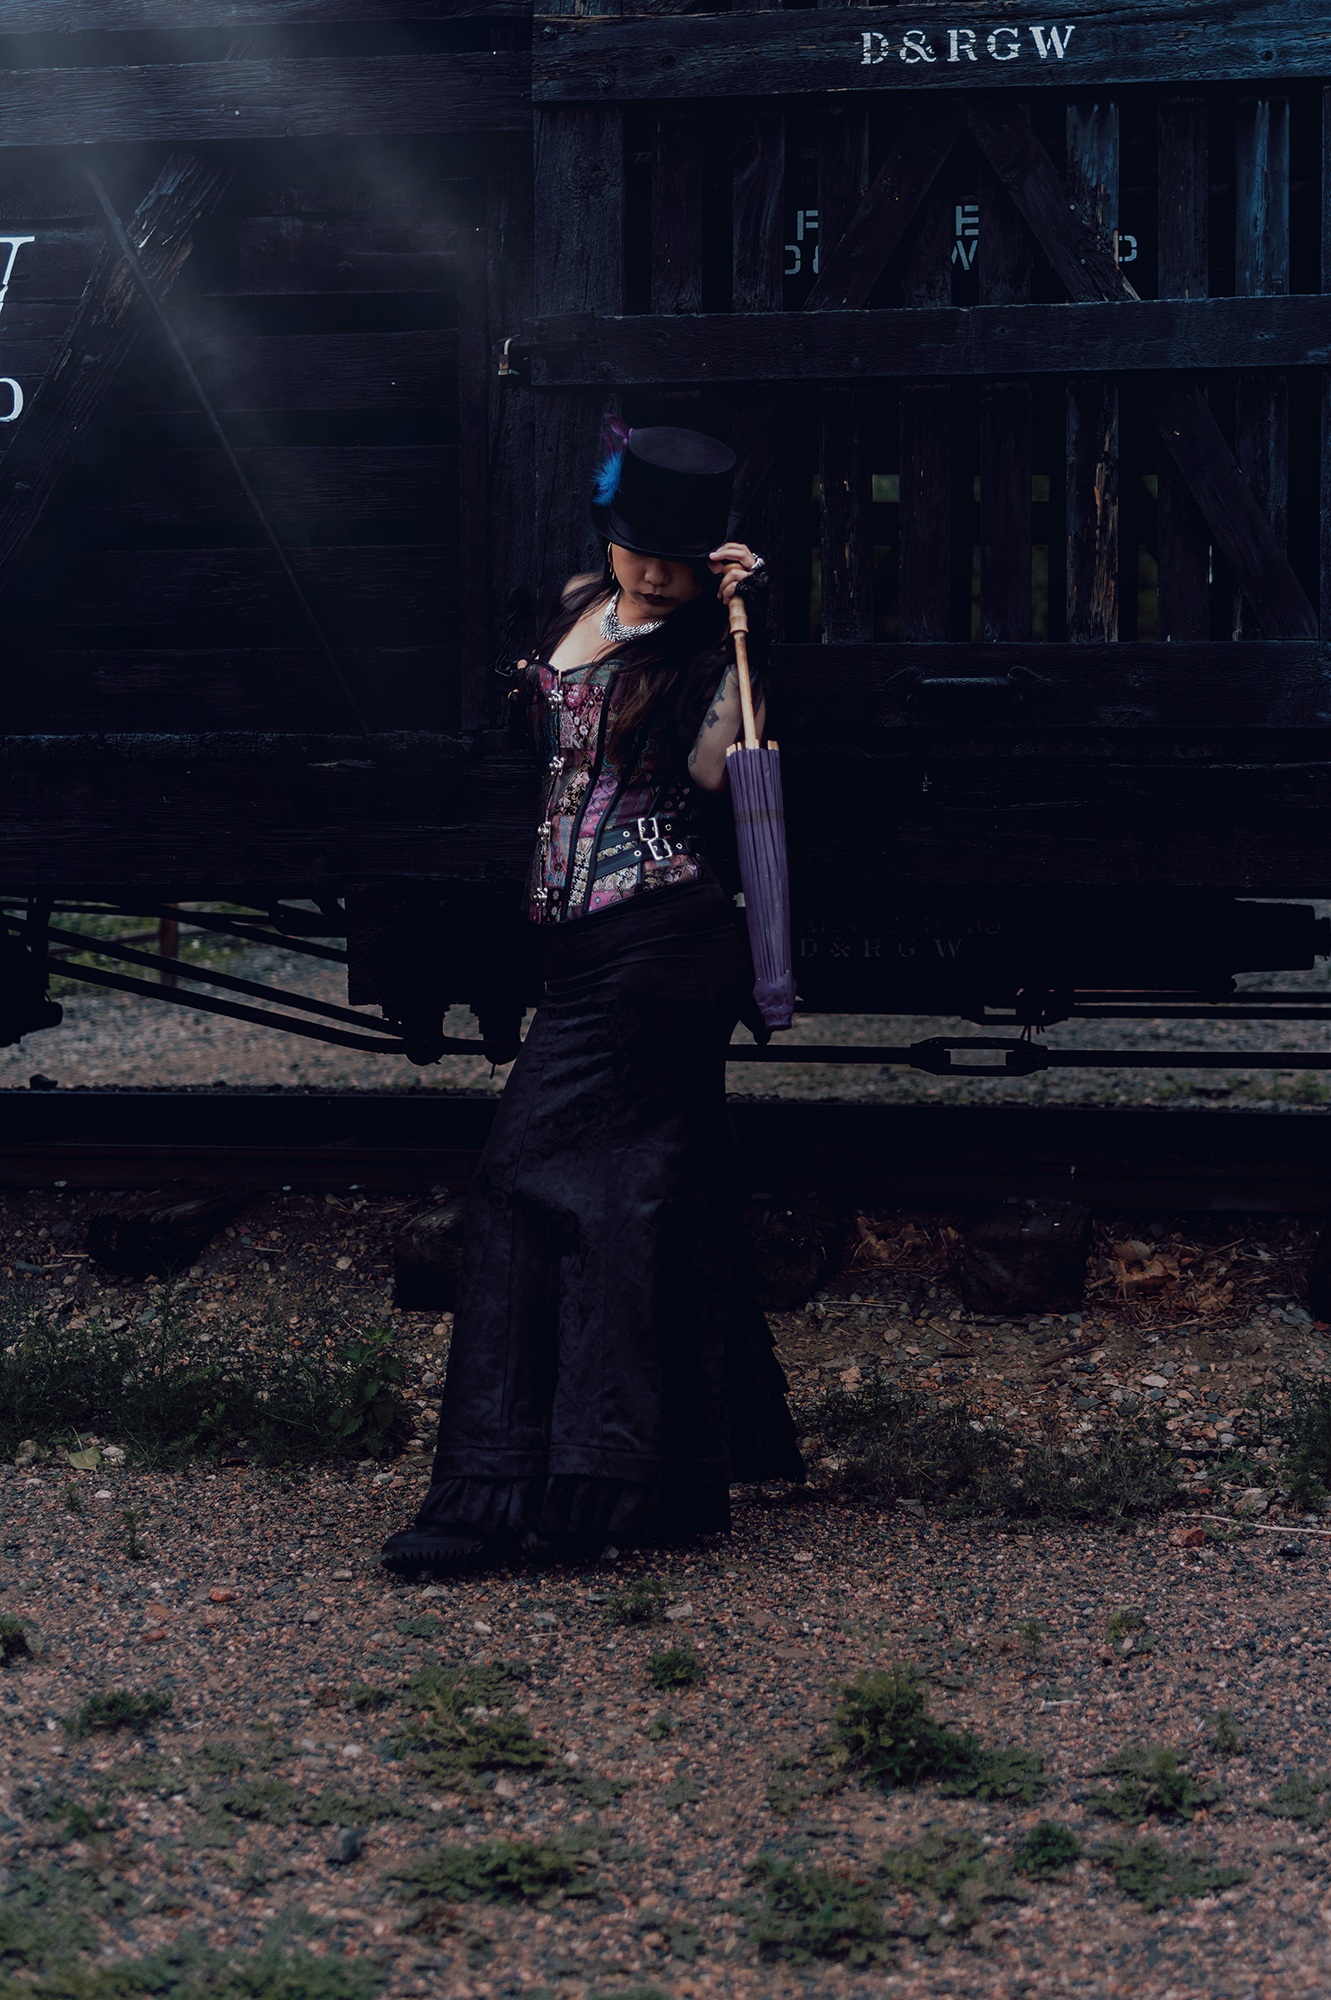 A woman standing next to a train wearing a Victorian style steampunk outfit for a fantasy photo by Kendra Colleen Photography